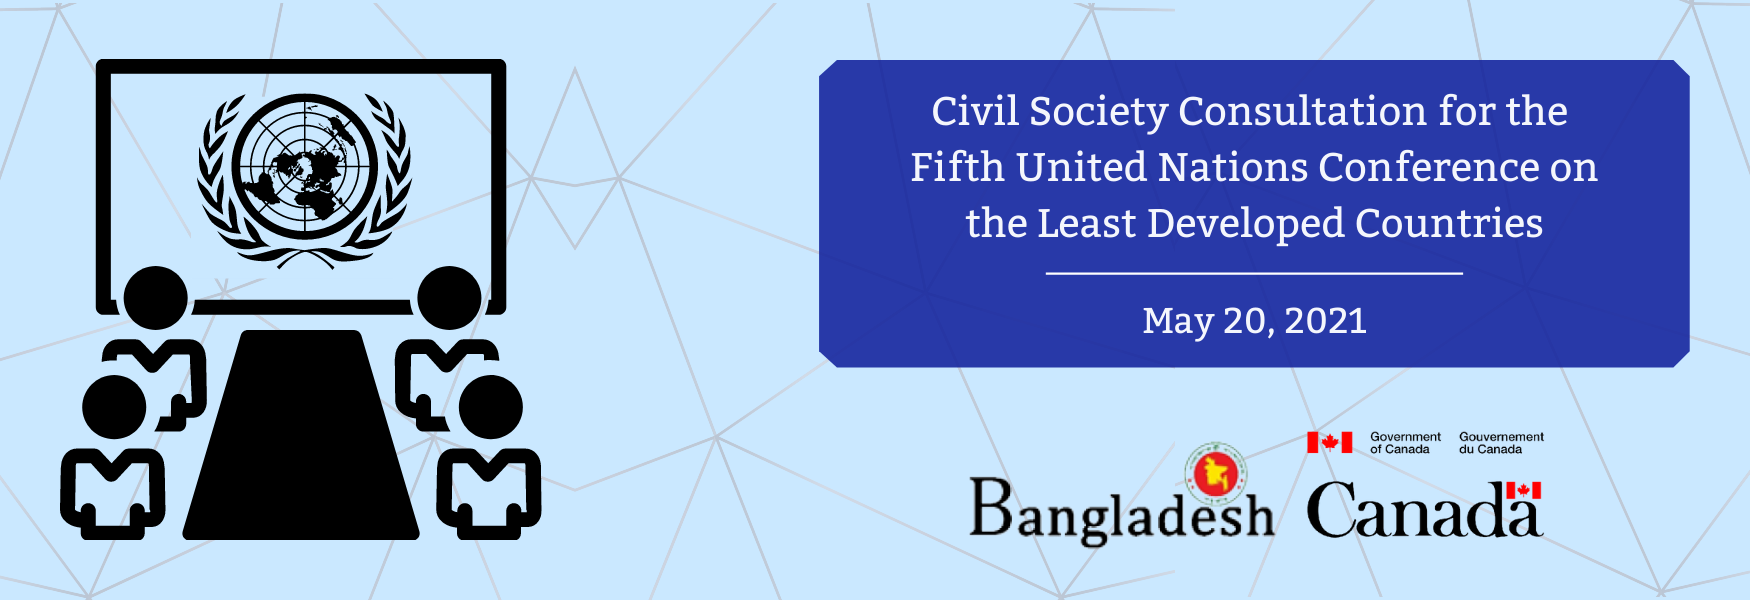 Civil Society Consultation for the Fifth United Nations Conference on the Least Developed Countries